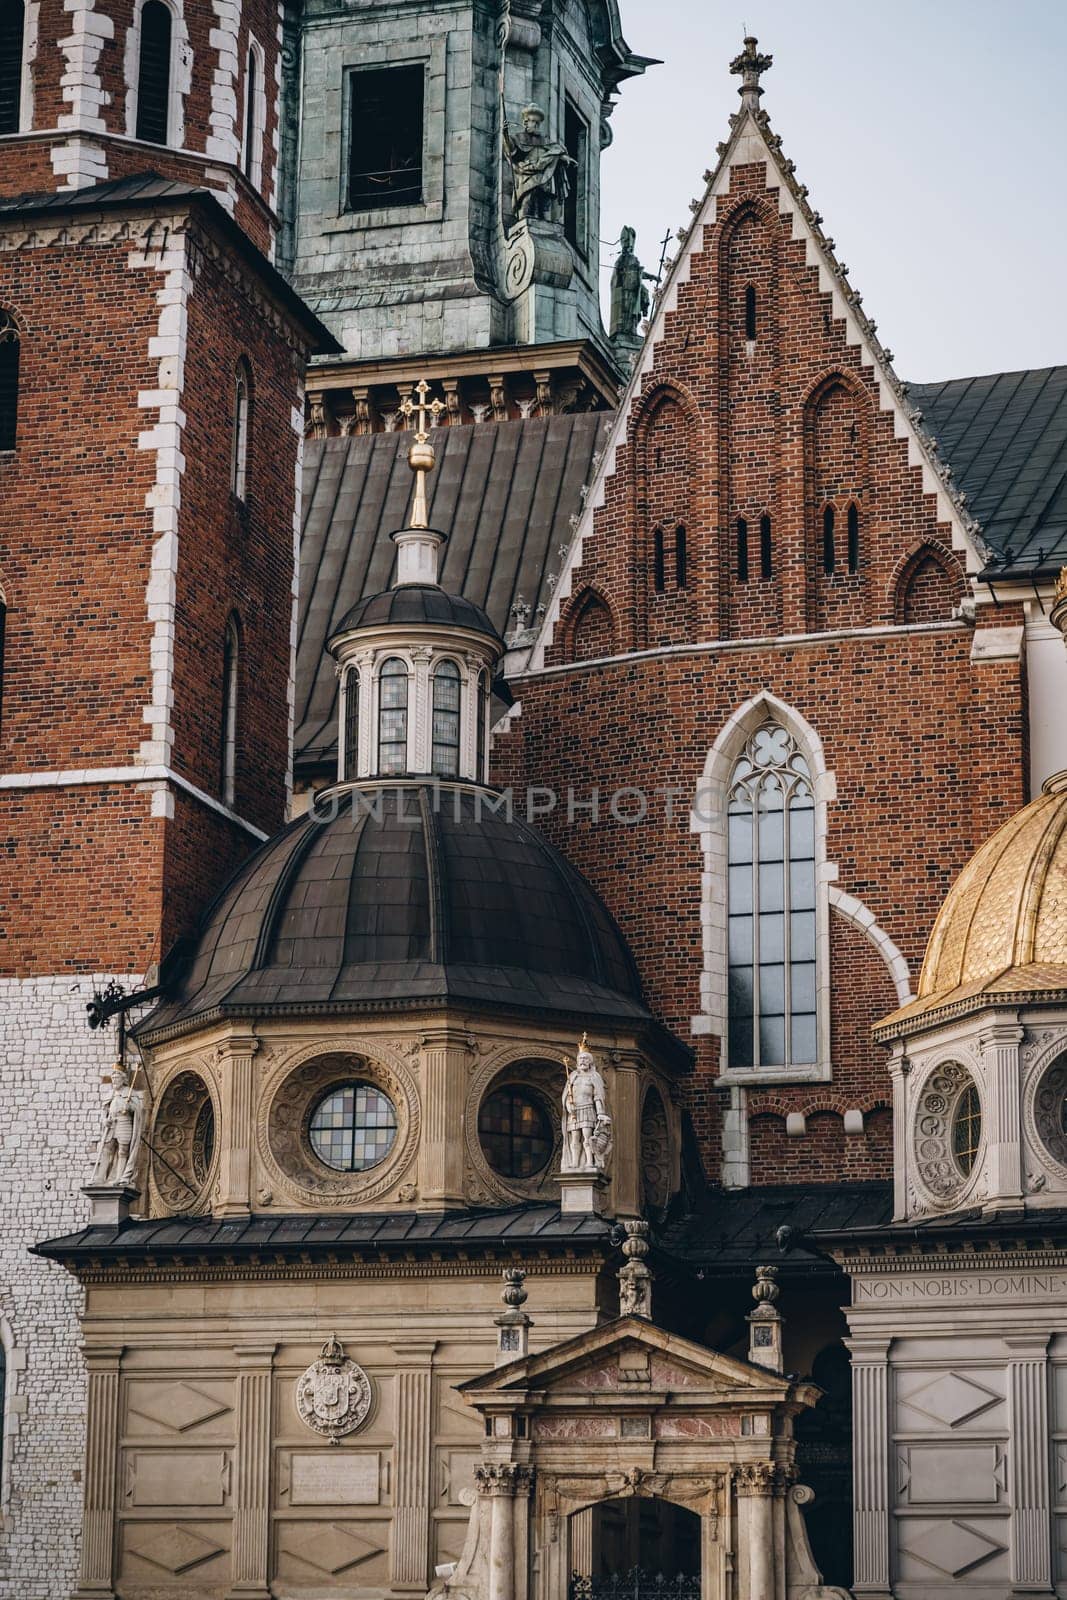 King statue, mosaic windows and columns on walls of Wawel Royal Castle, Krakow, Poland by Popov